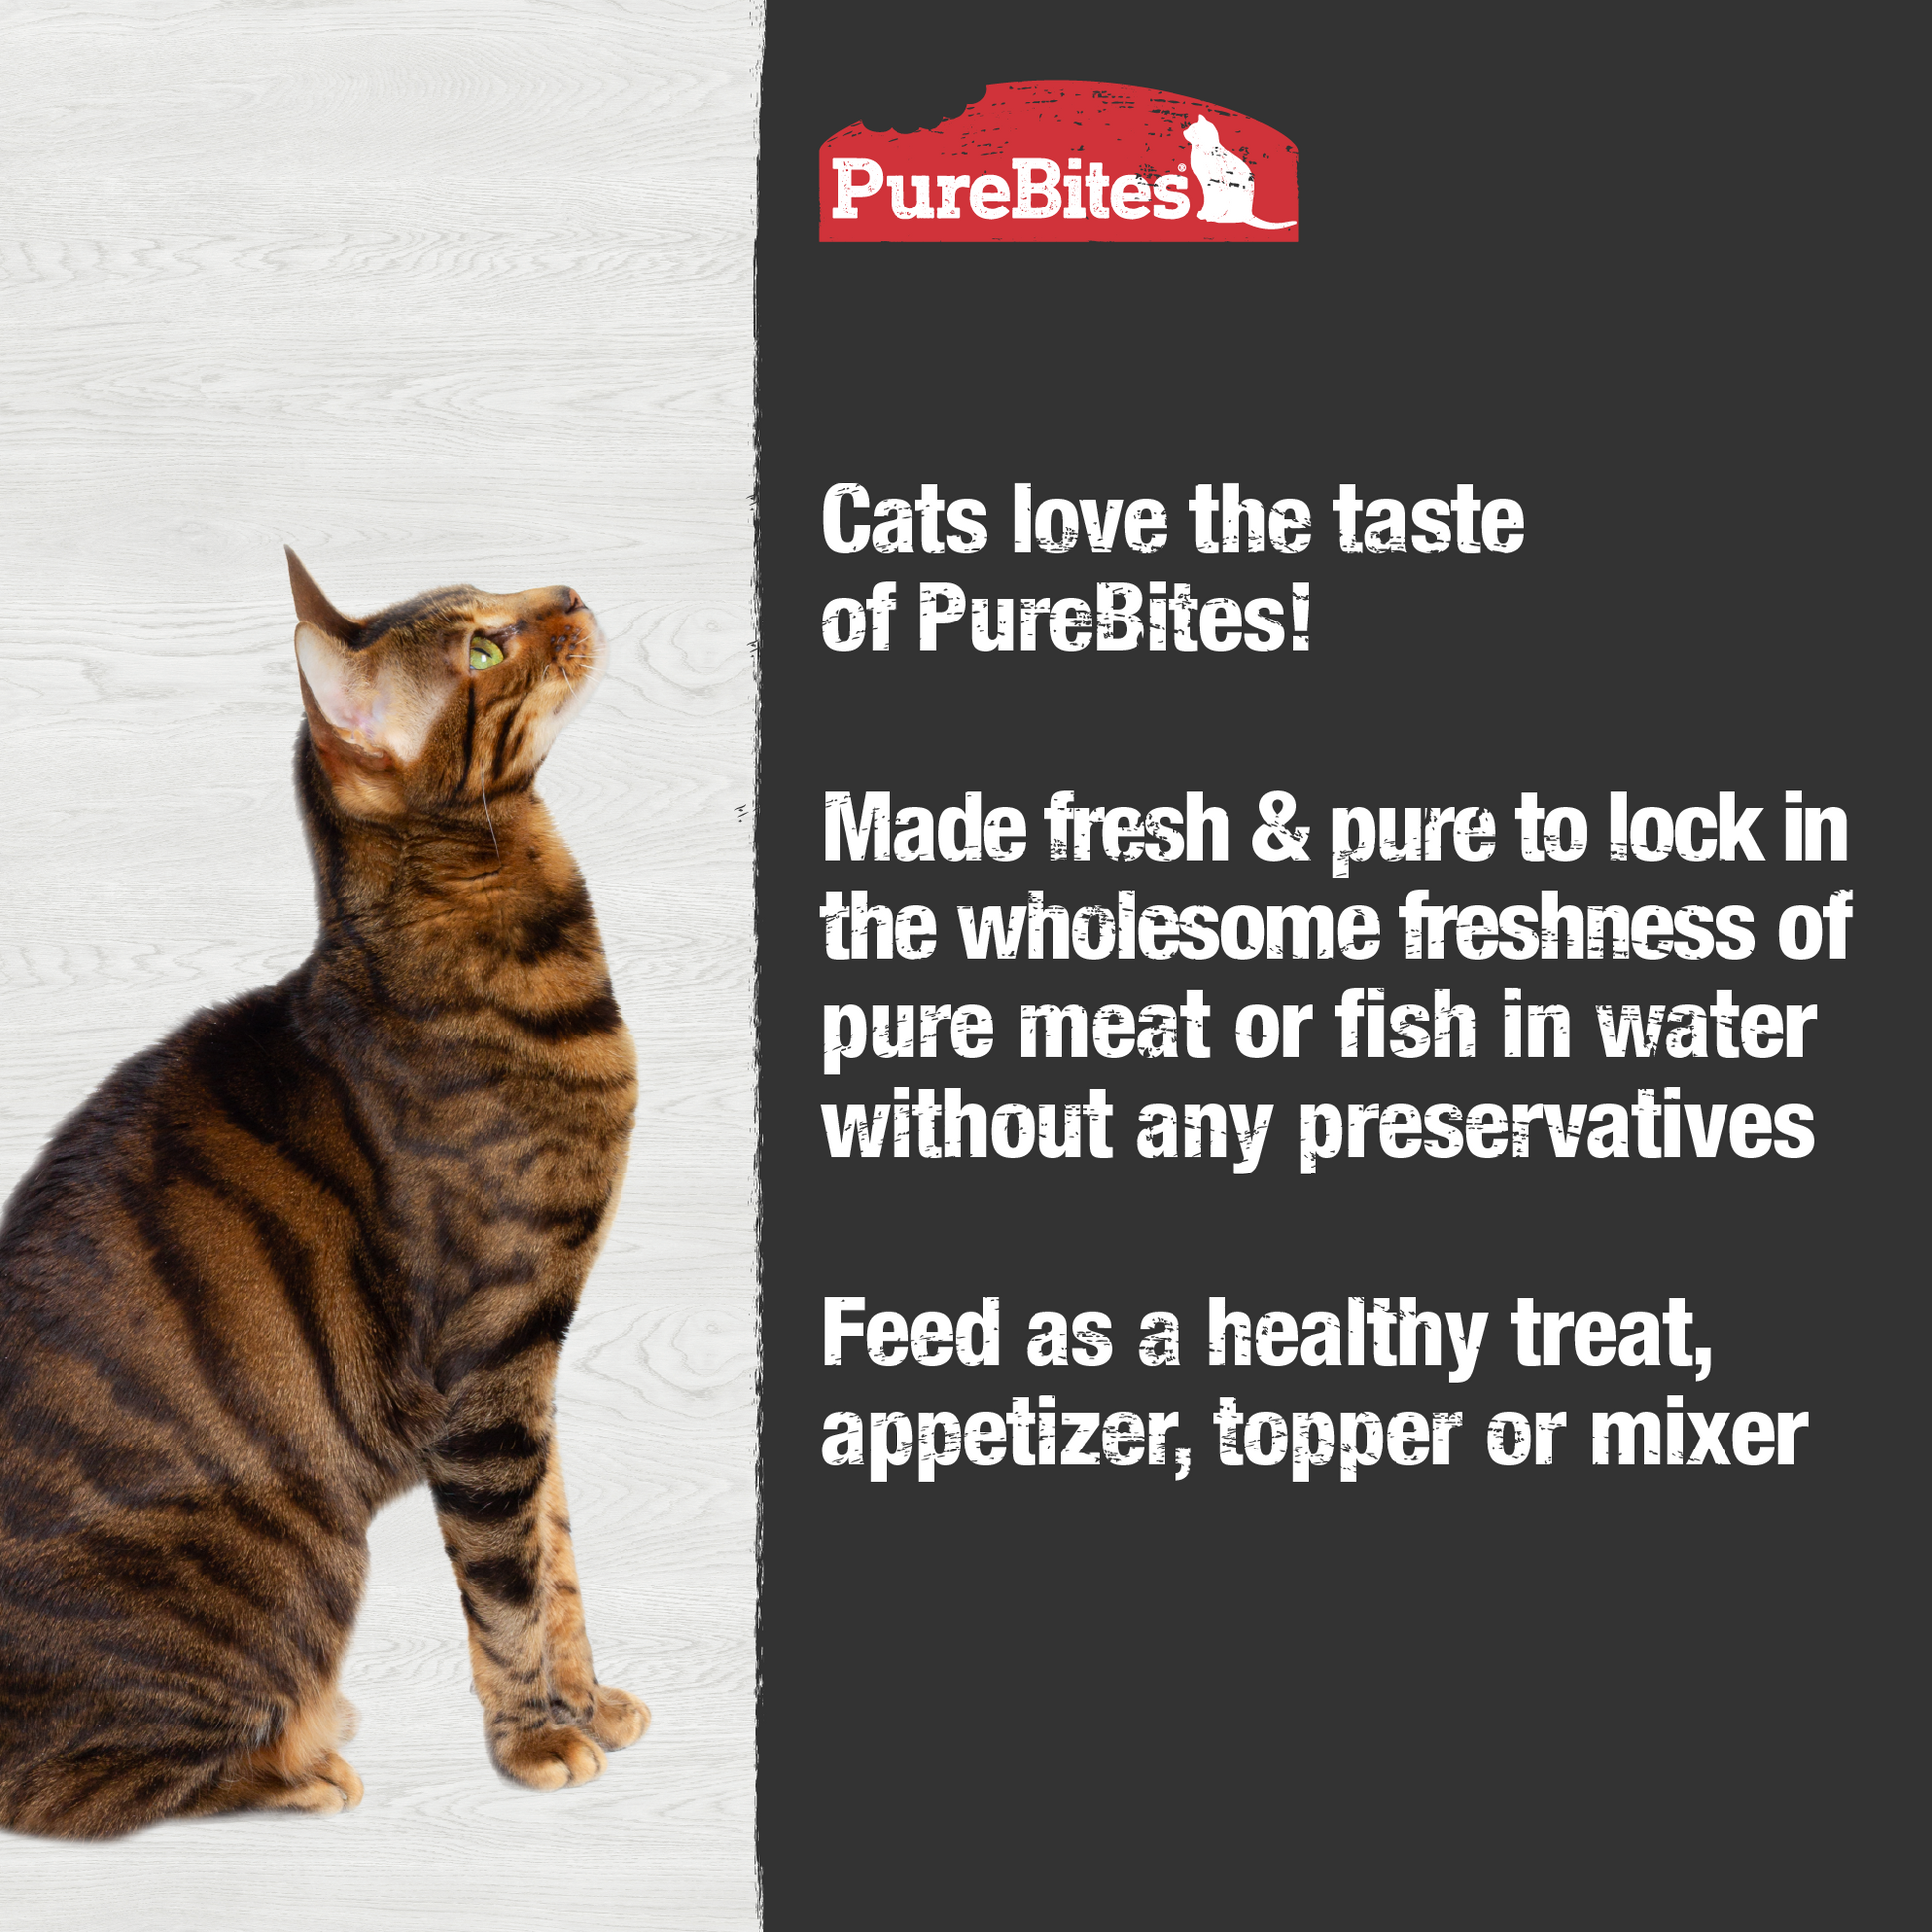 Made fresh & pure means more protein and nutrients packed into every tray. The chicken in our wet mixers is delicately steamed to help preserve the ingredient's taste, and nutrition, and mirror a cat’s ancestral diet